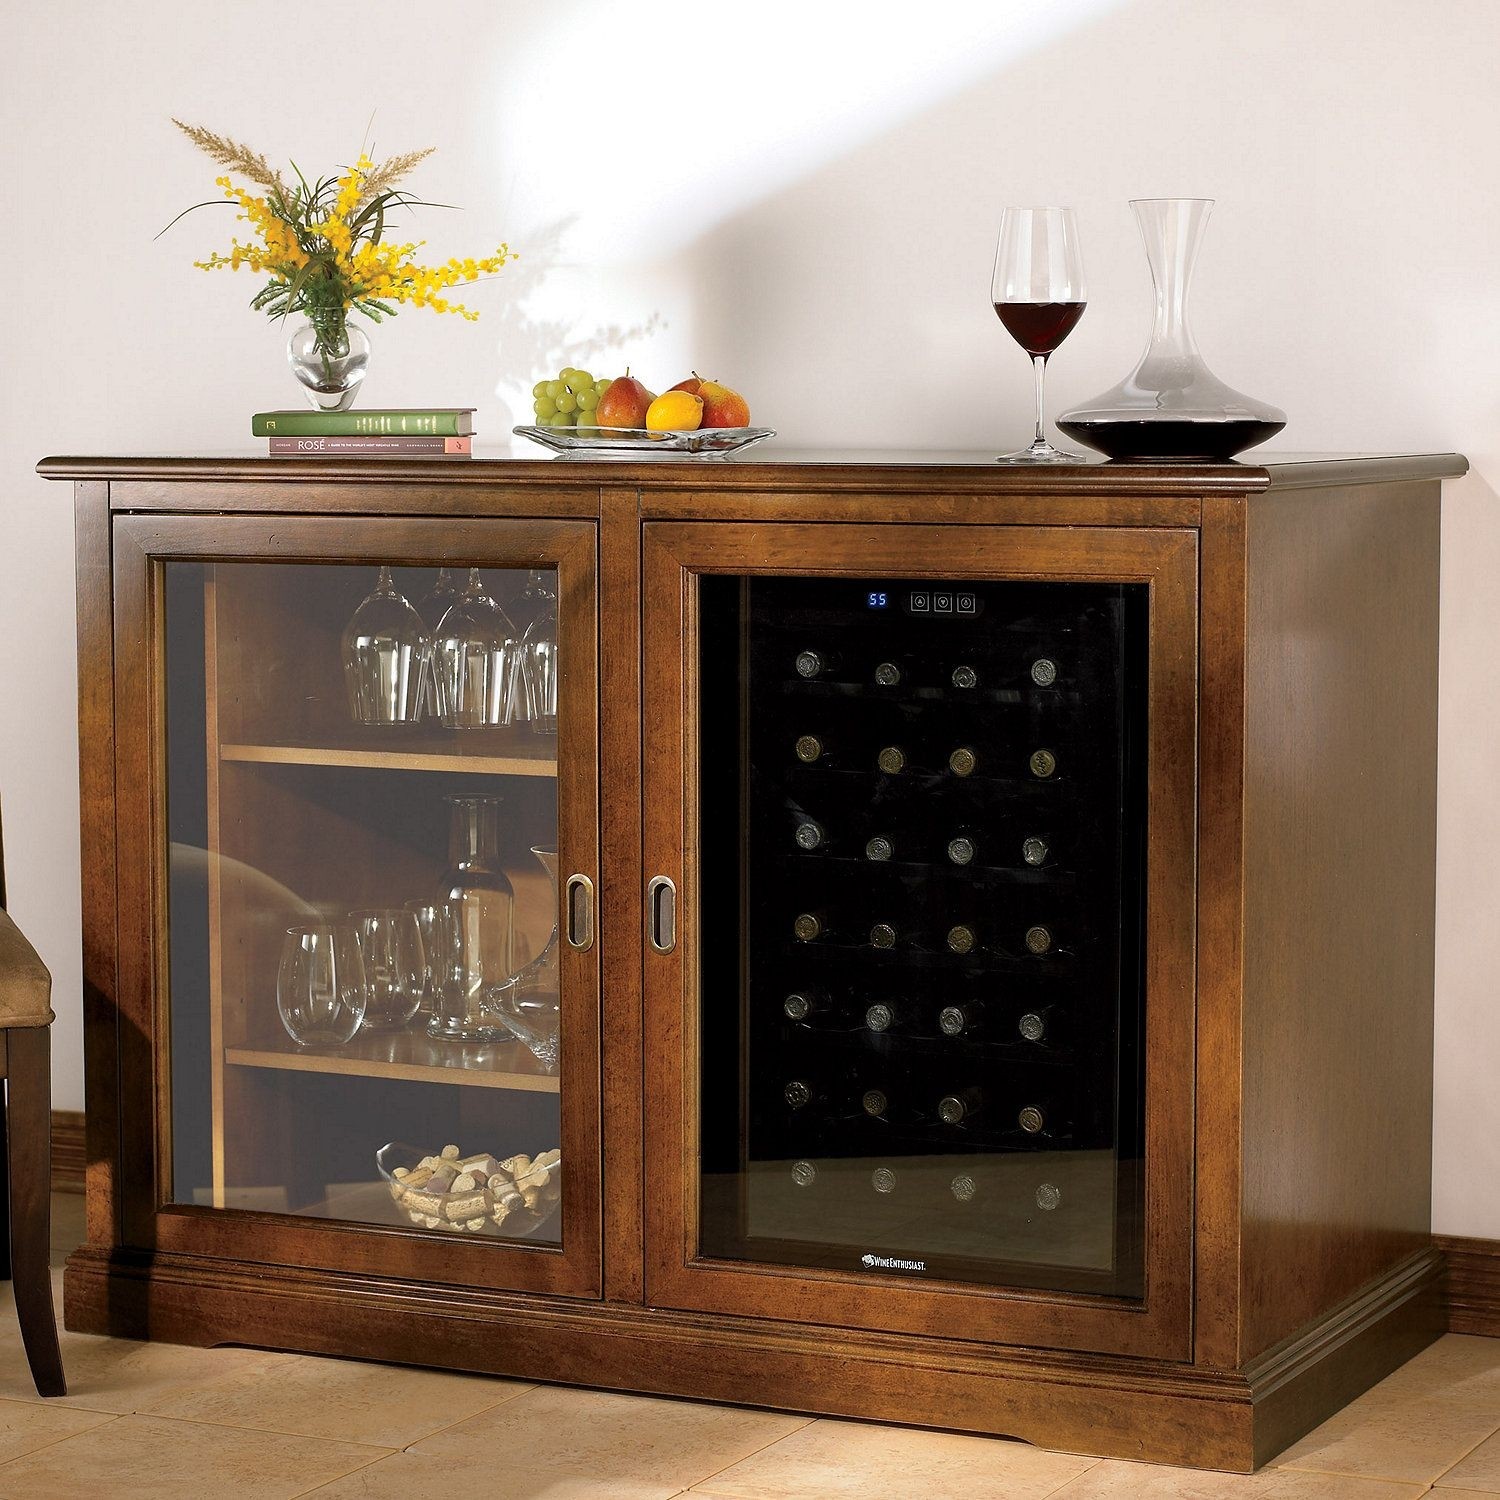 Wine cabinet with cooler